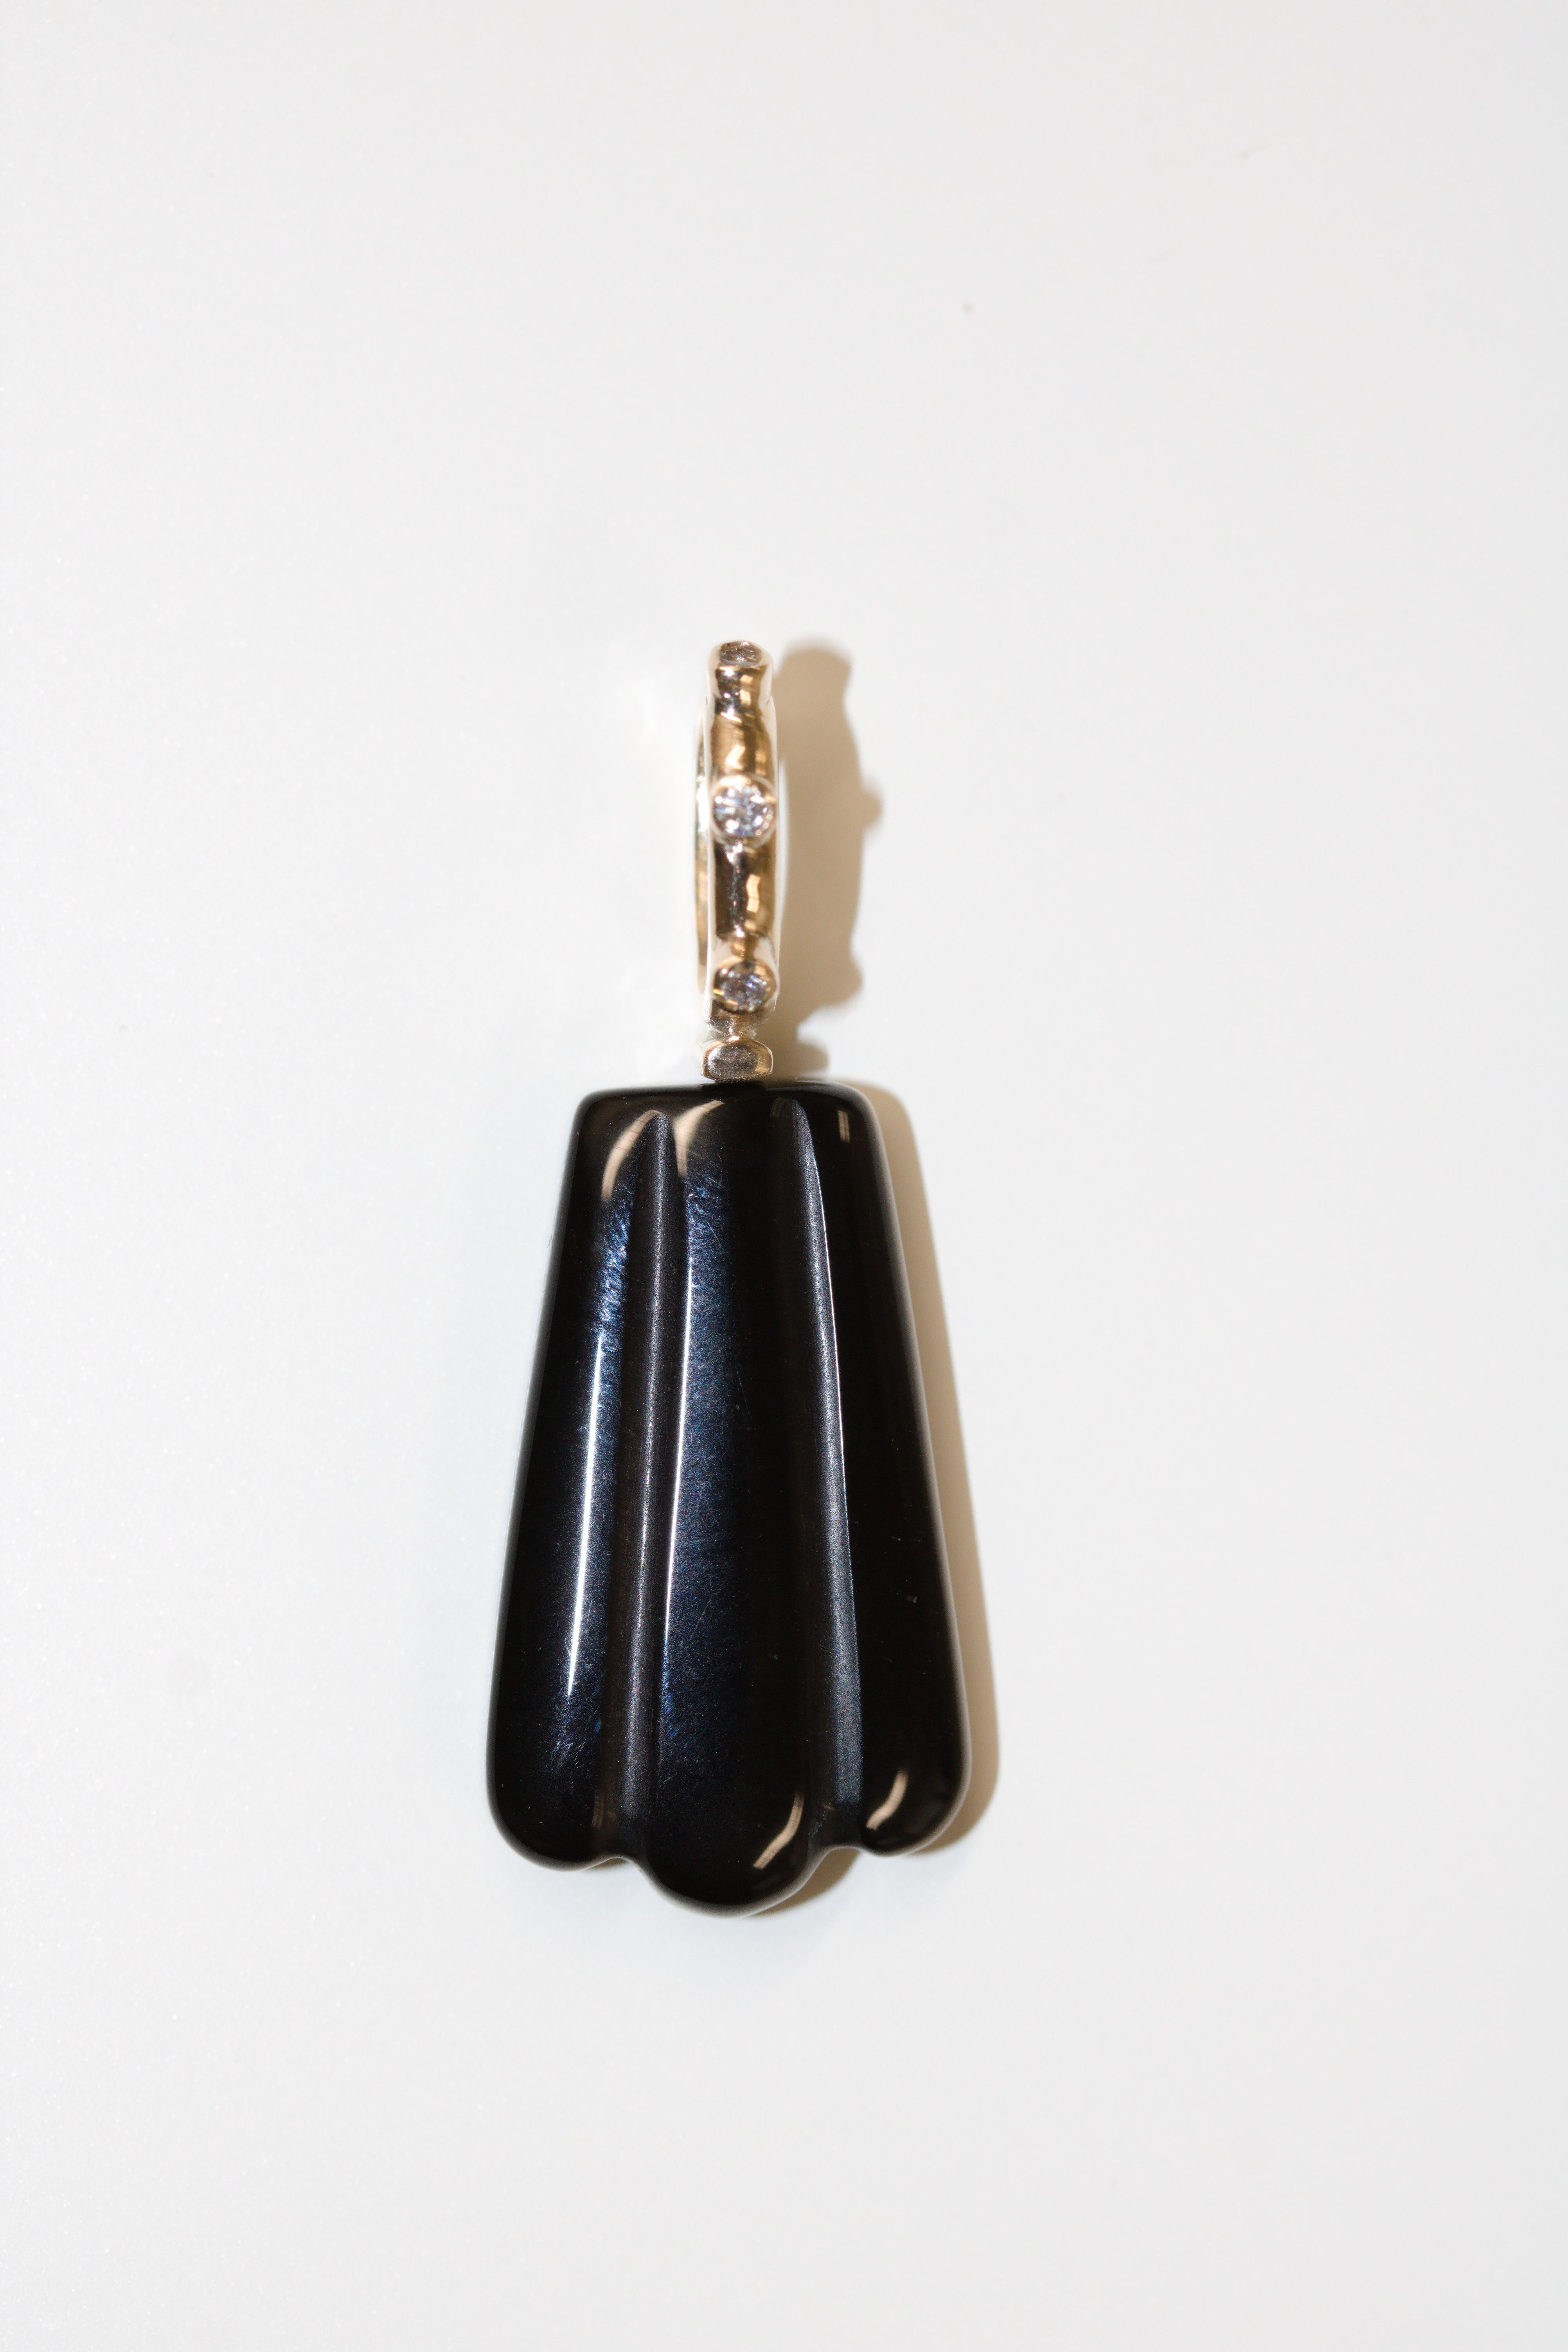 This pendant necklace is a one of a kind creation from the London based jewellery brand Skomer Studio.

Crafted by hand in the designer's studio, this black onyx and diamond shell pendant has been made using recycled 9kt gold and black silk rope. As